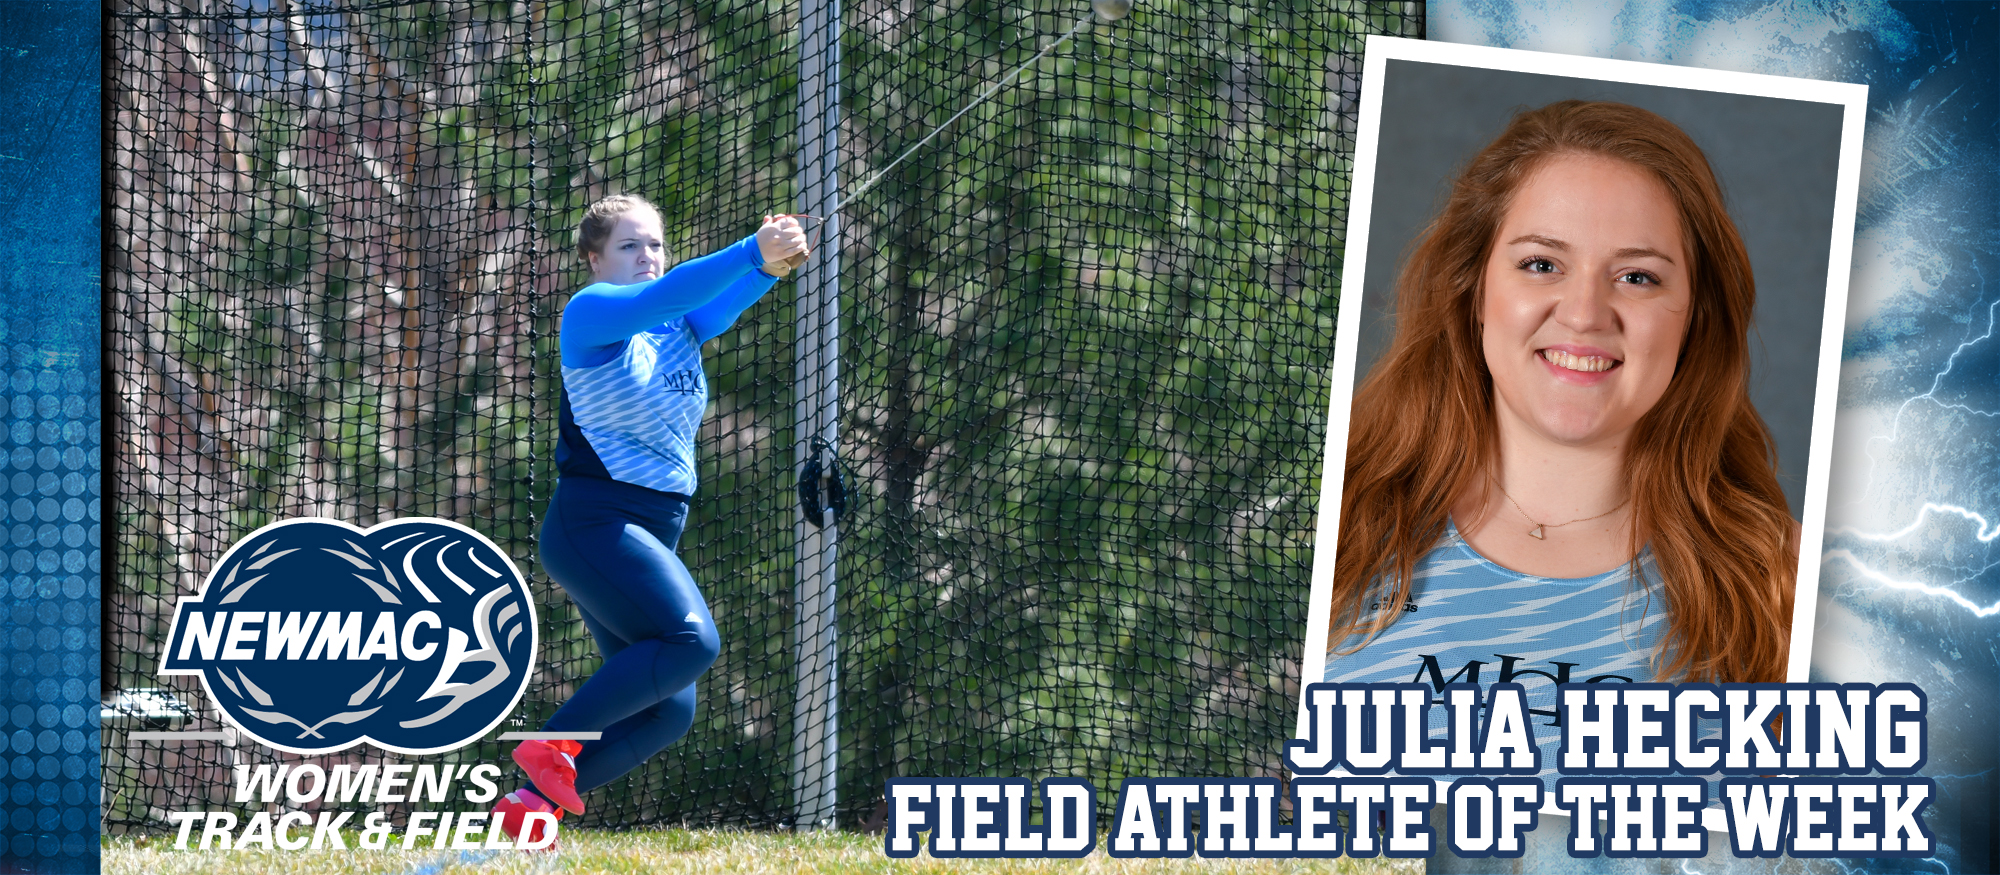 Action photo of Lyons track & field athlete, Julia Hecking, who was named the NEWMAC Women's Field Athlete of the Week for March 25, 2019.